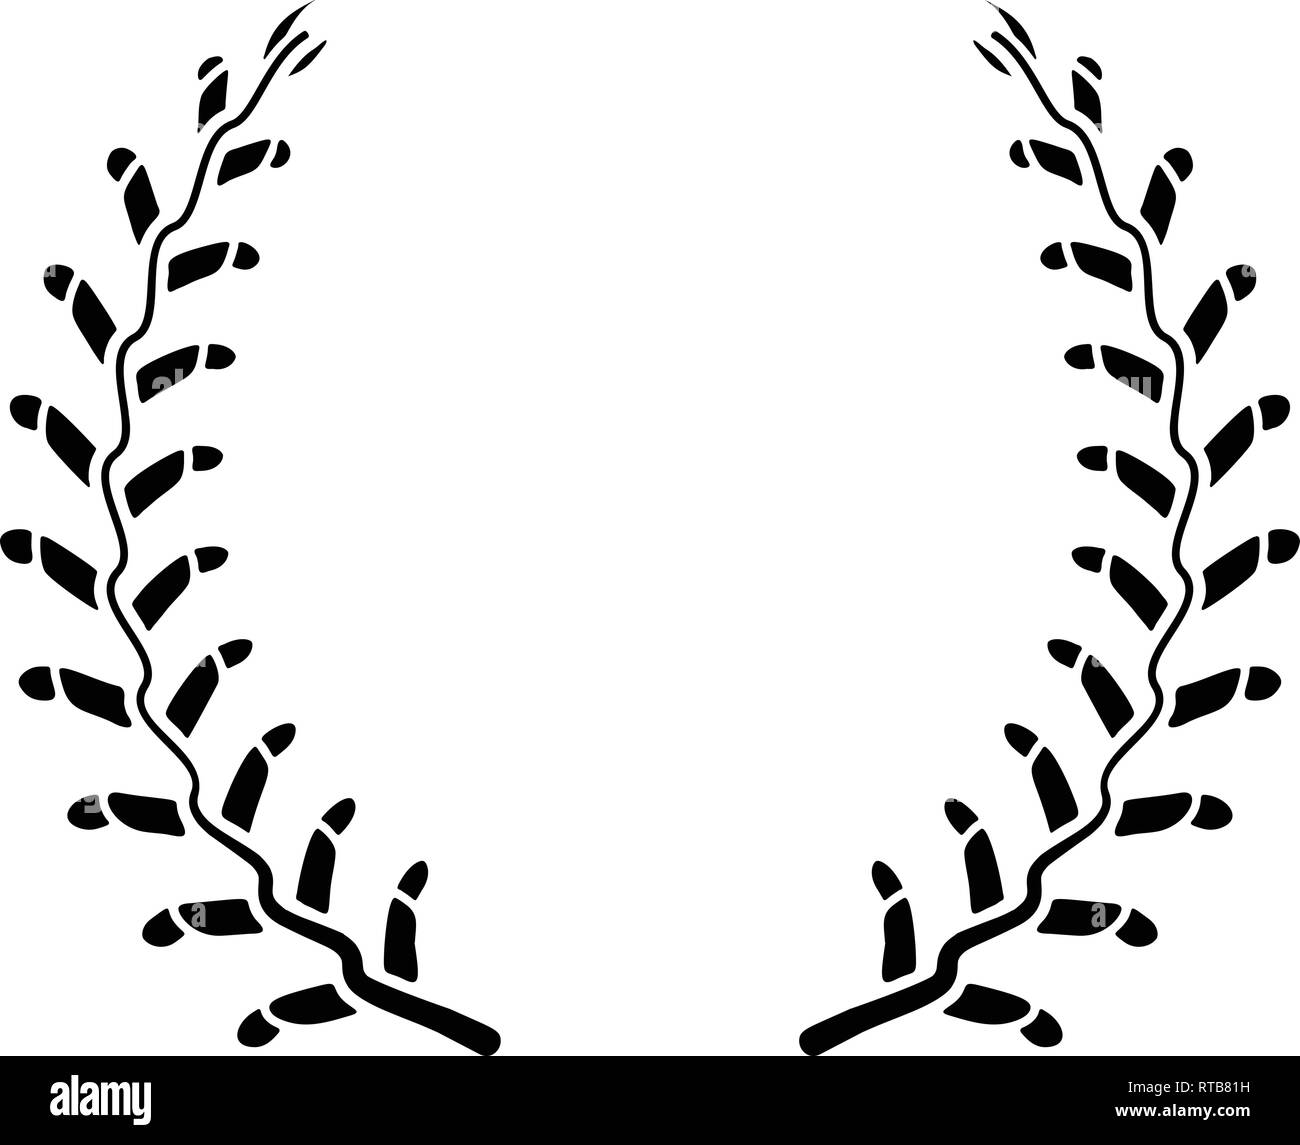 Blank for the baseball emblem consisting of a wreath of baseball laces. Vector illustration on white Stock Vector